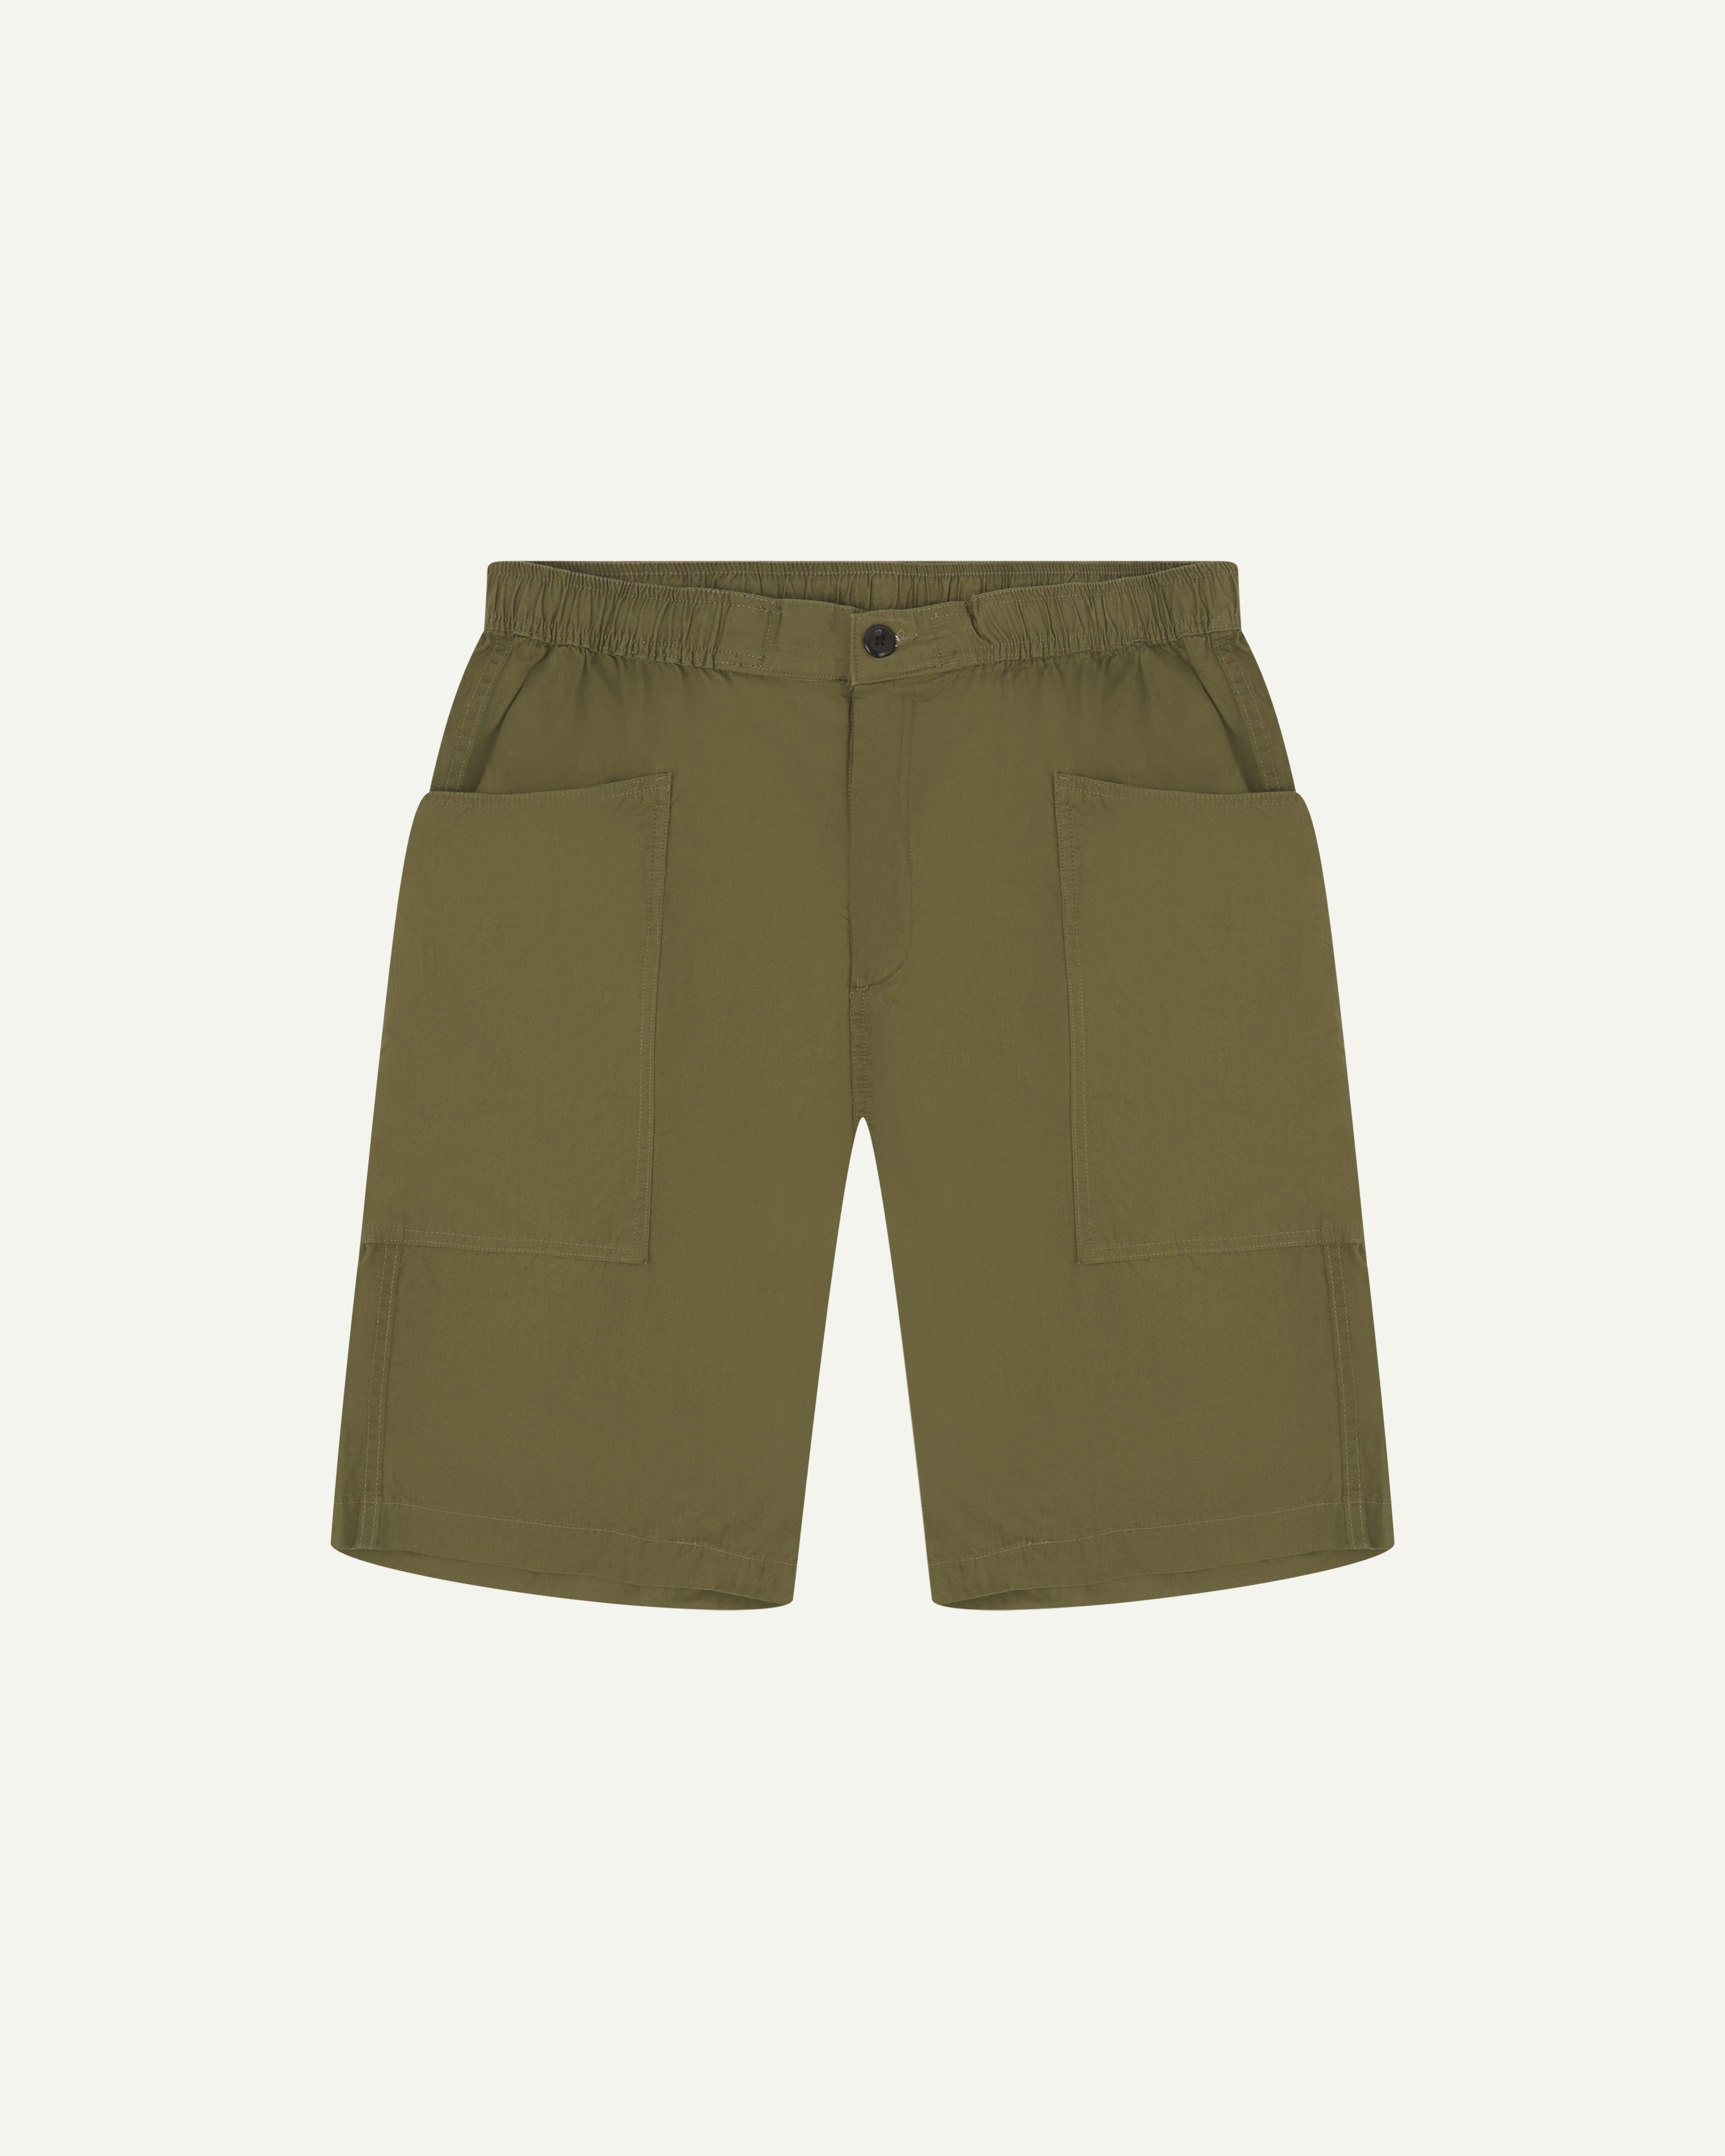 Front view of olive green organic cotton #5015 lightweight cotton shorts by Uskees. Clear view of lightweight elasticated waist and deep front pockets.